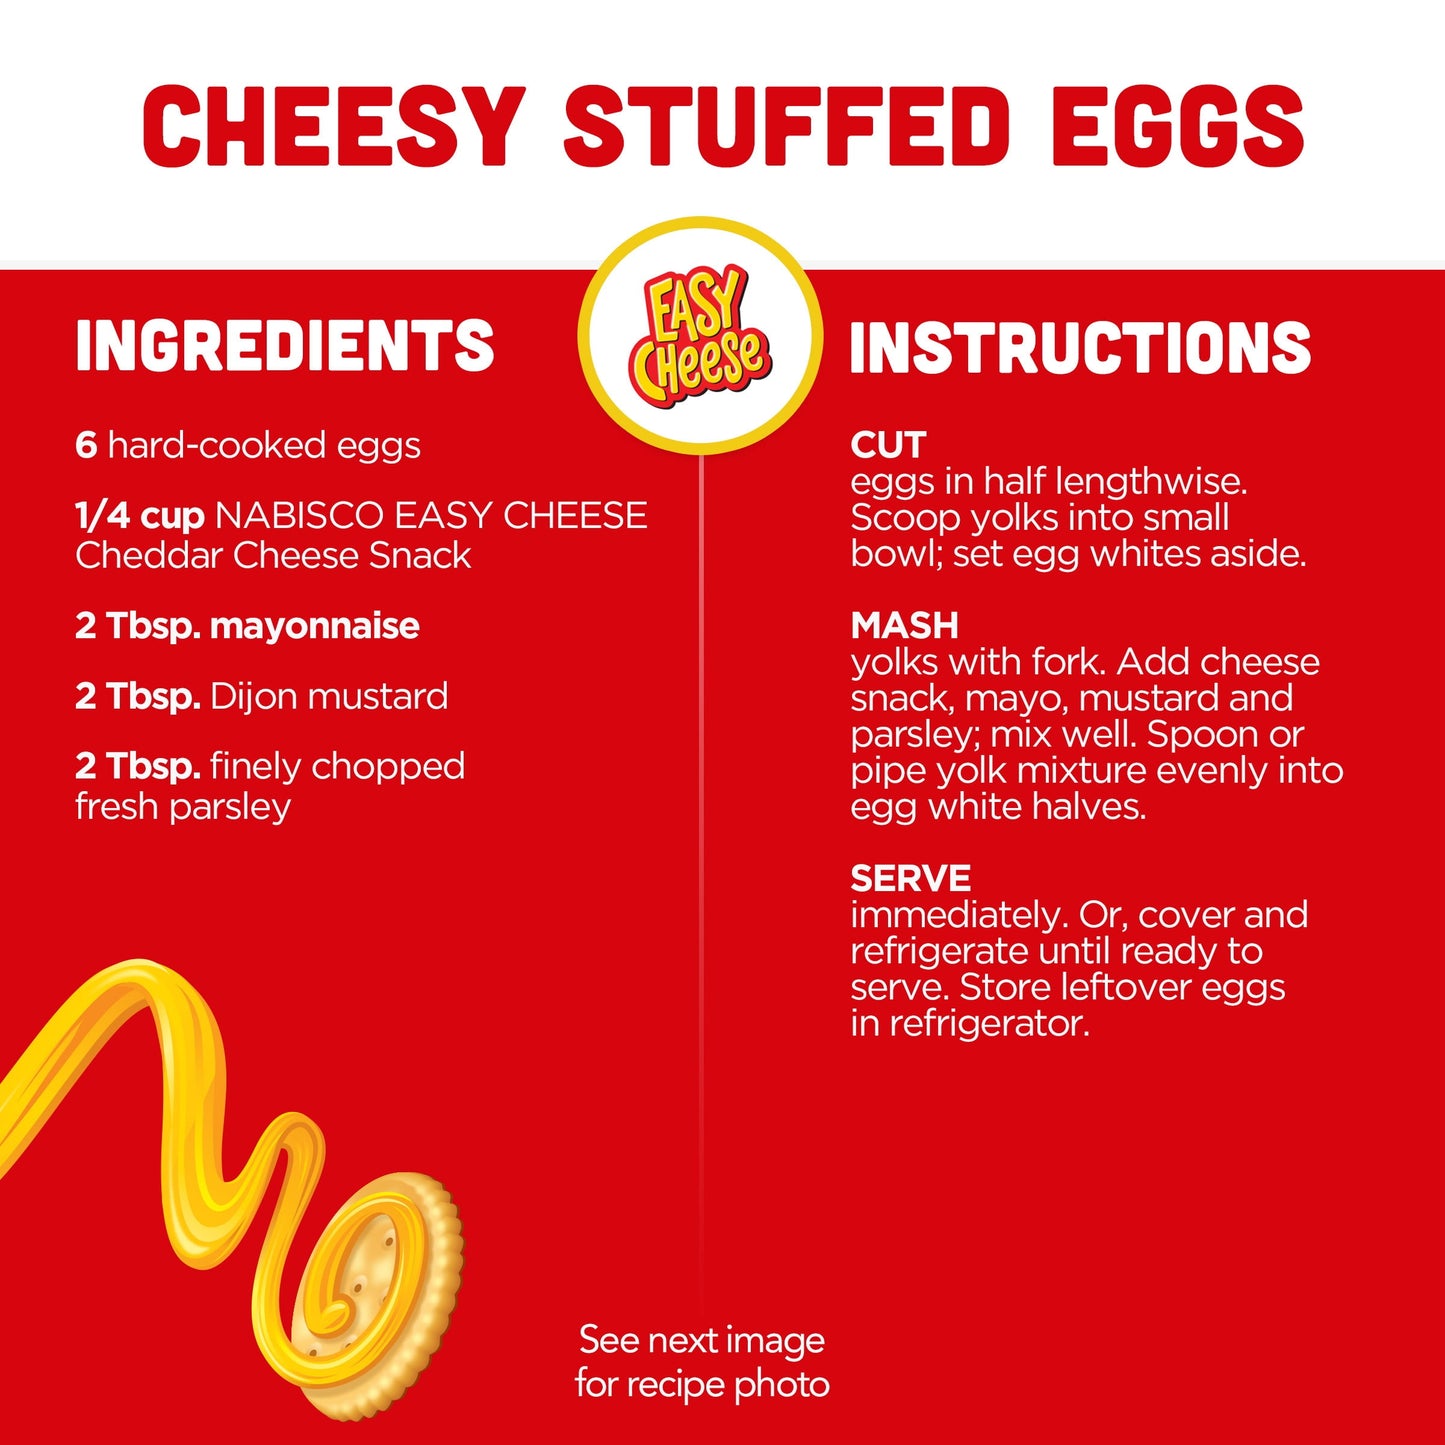 Easy Cheese Cheddar Cheese Snack, 8 Oz